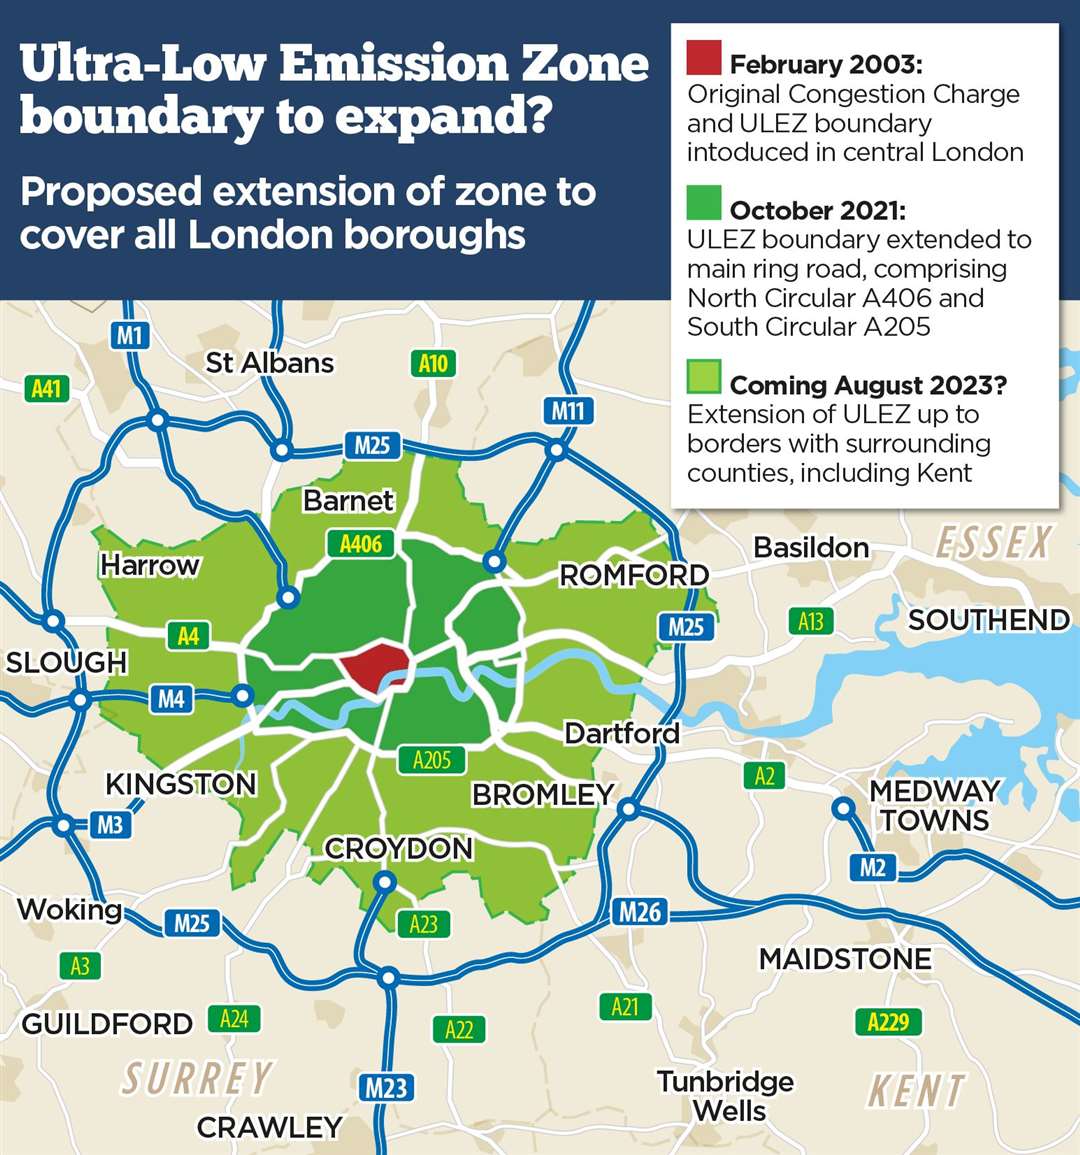 How the ULEZ is planned to expand.